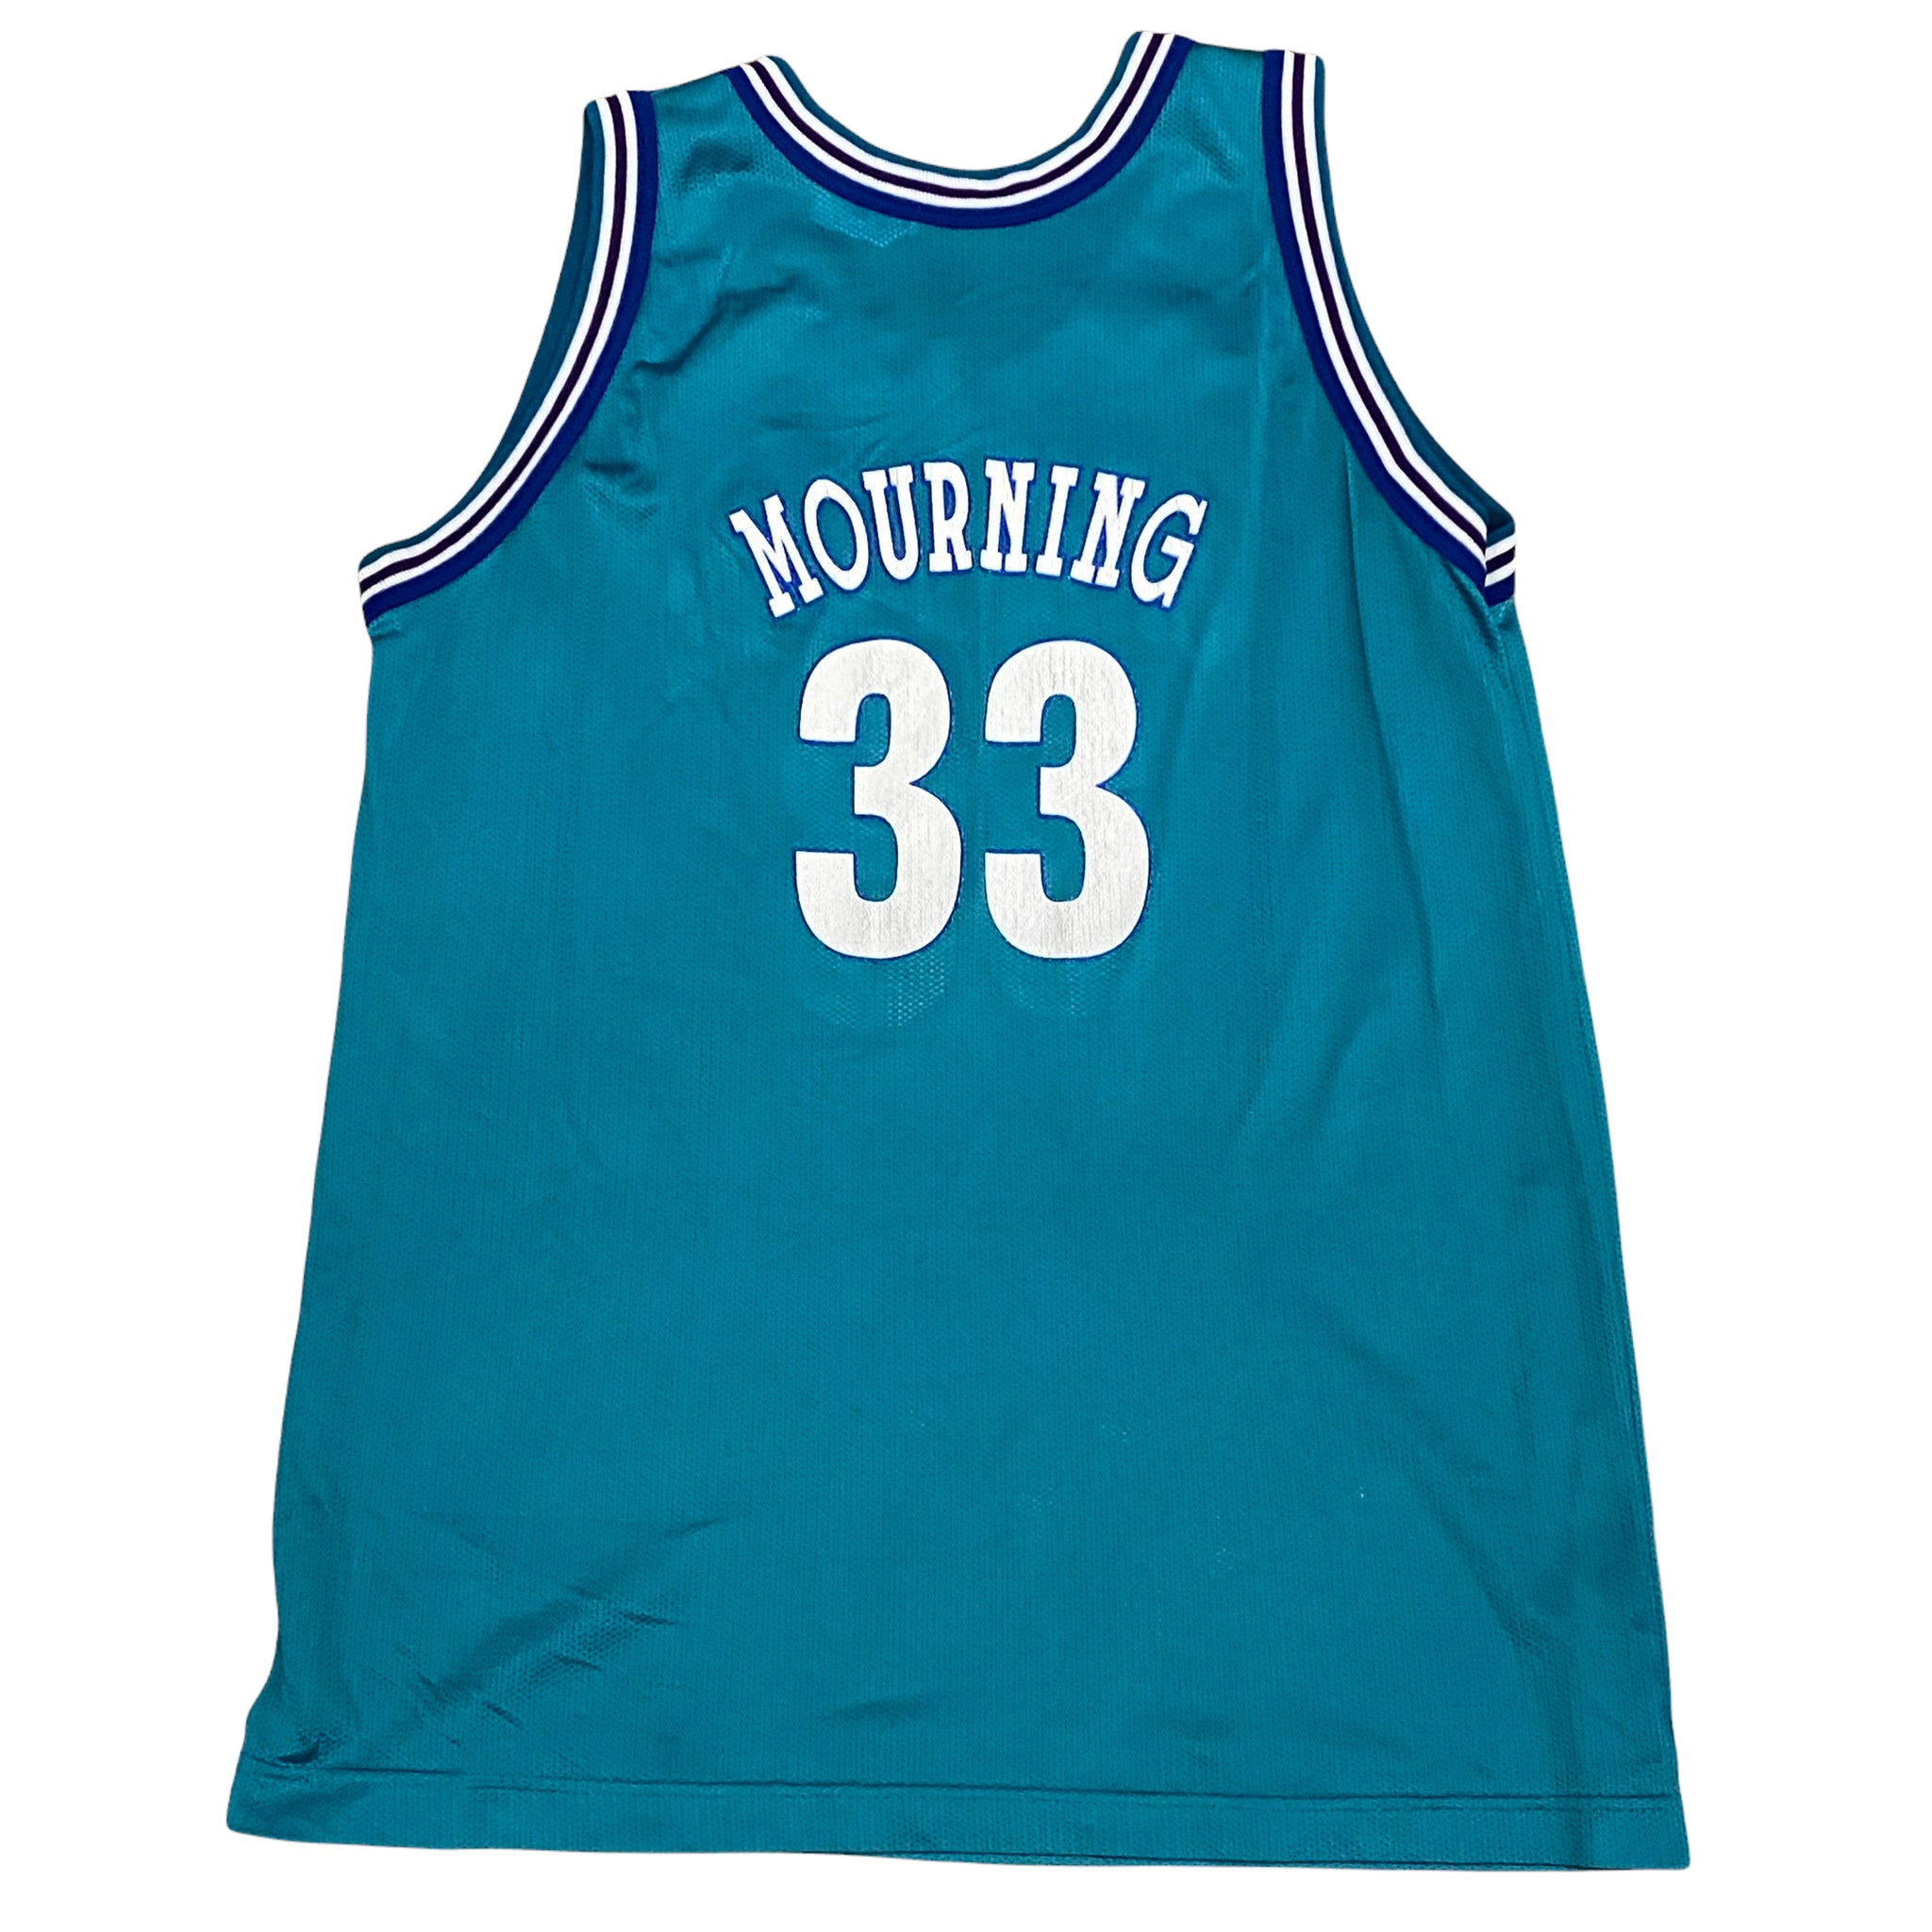 1995 CHARLOTTE HORNETS MOURNING #33 CHAMPION JERSEY (AWAY) M